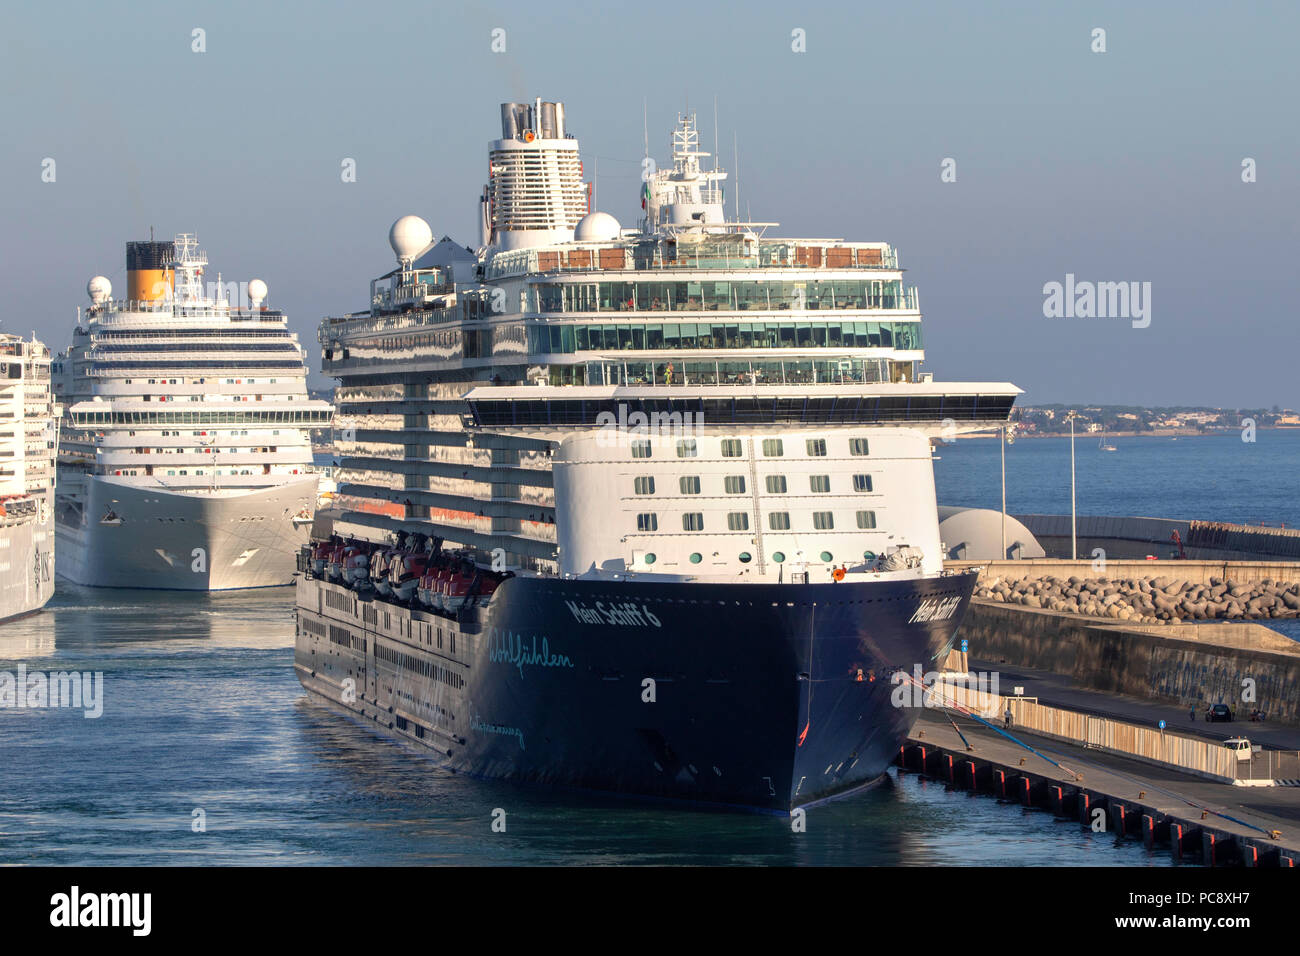 MSC Fantasia cruise ship owned by MSC Cruises, Mein Schiff 6 cruise ship owned by TUI Cruises and Costa Diadema all 3 seen at Civitavecchia in Italy Stock Photo